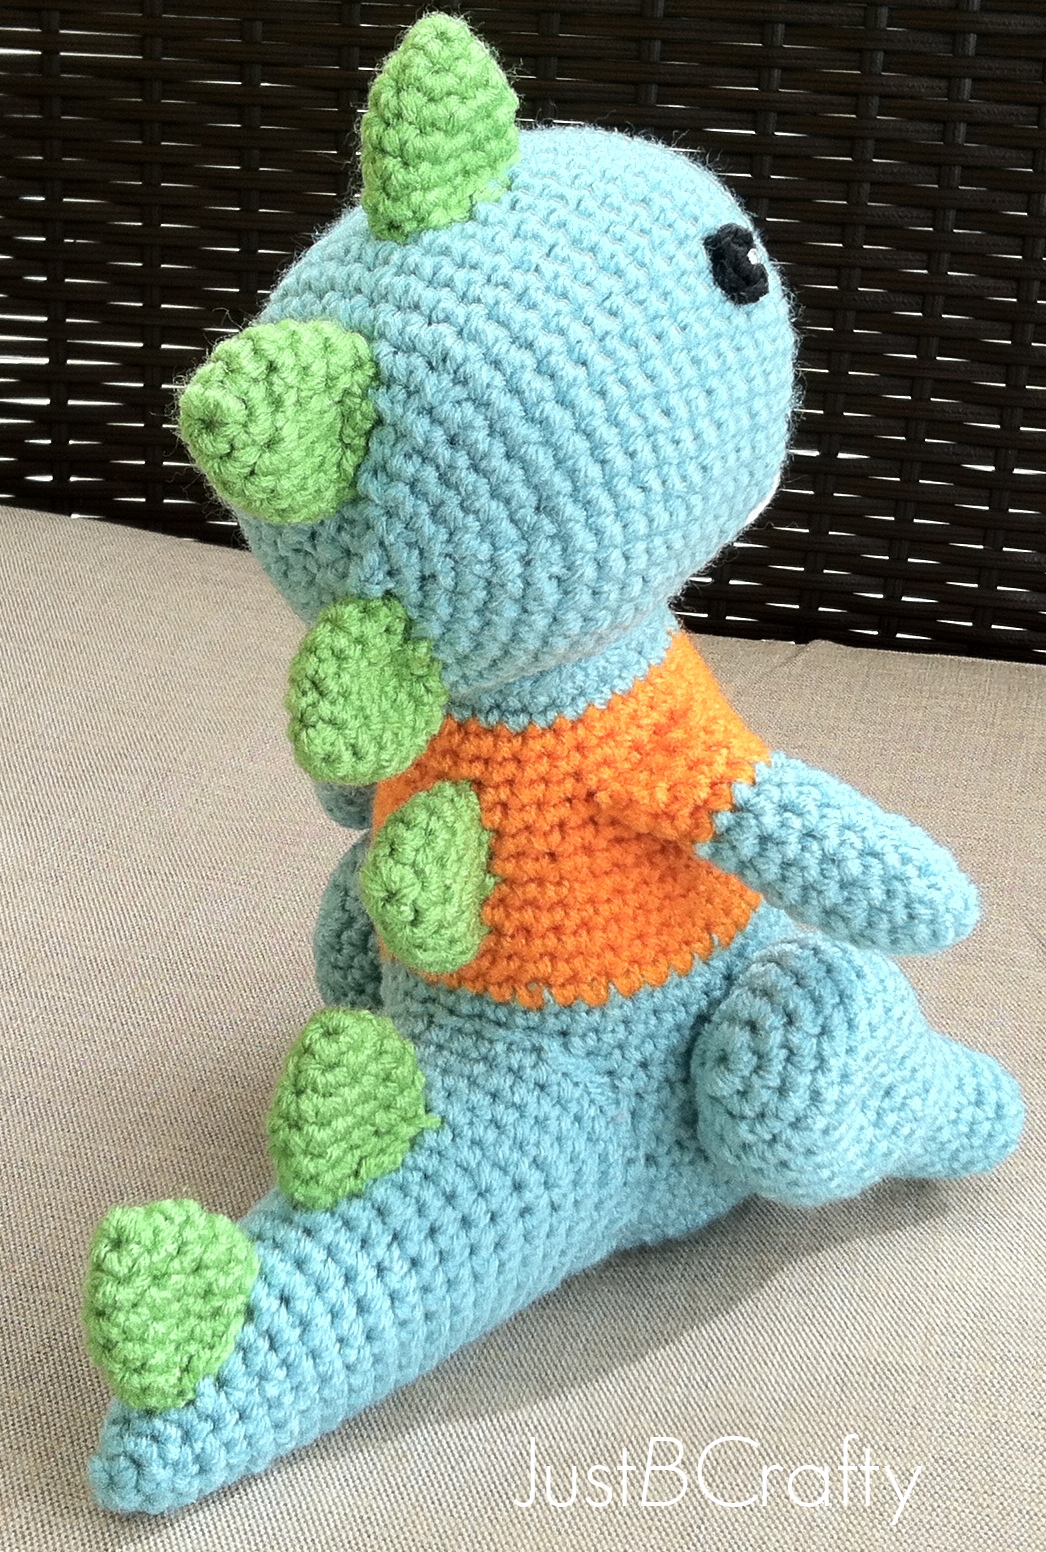 Tips for Attaching Amigurumi Limbs